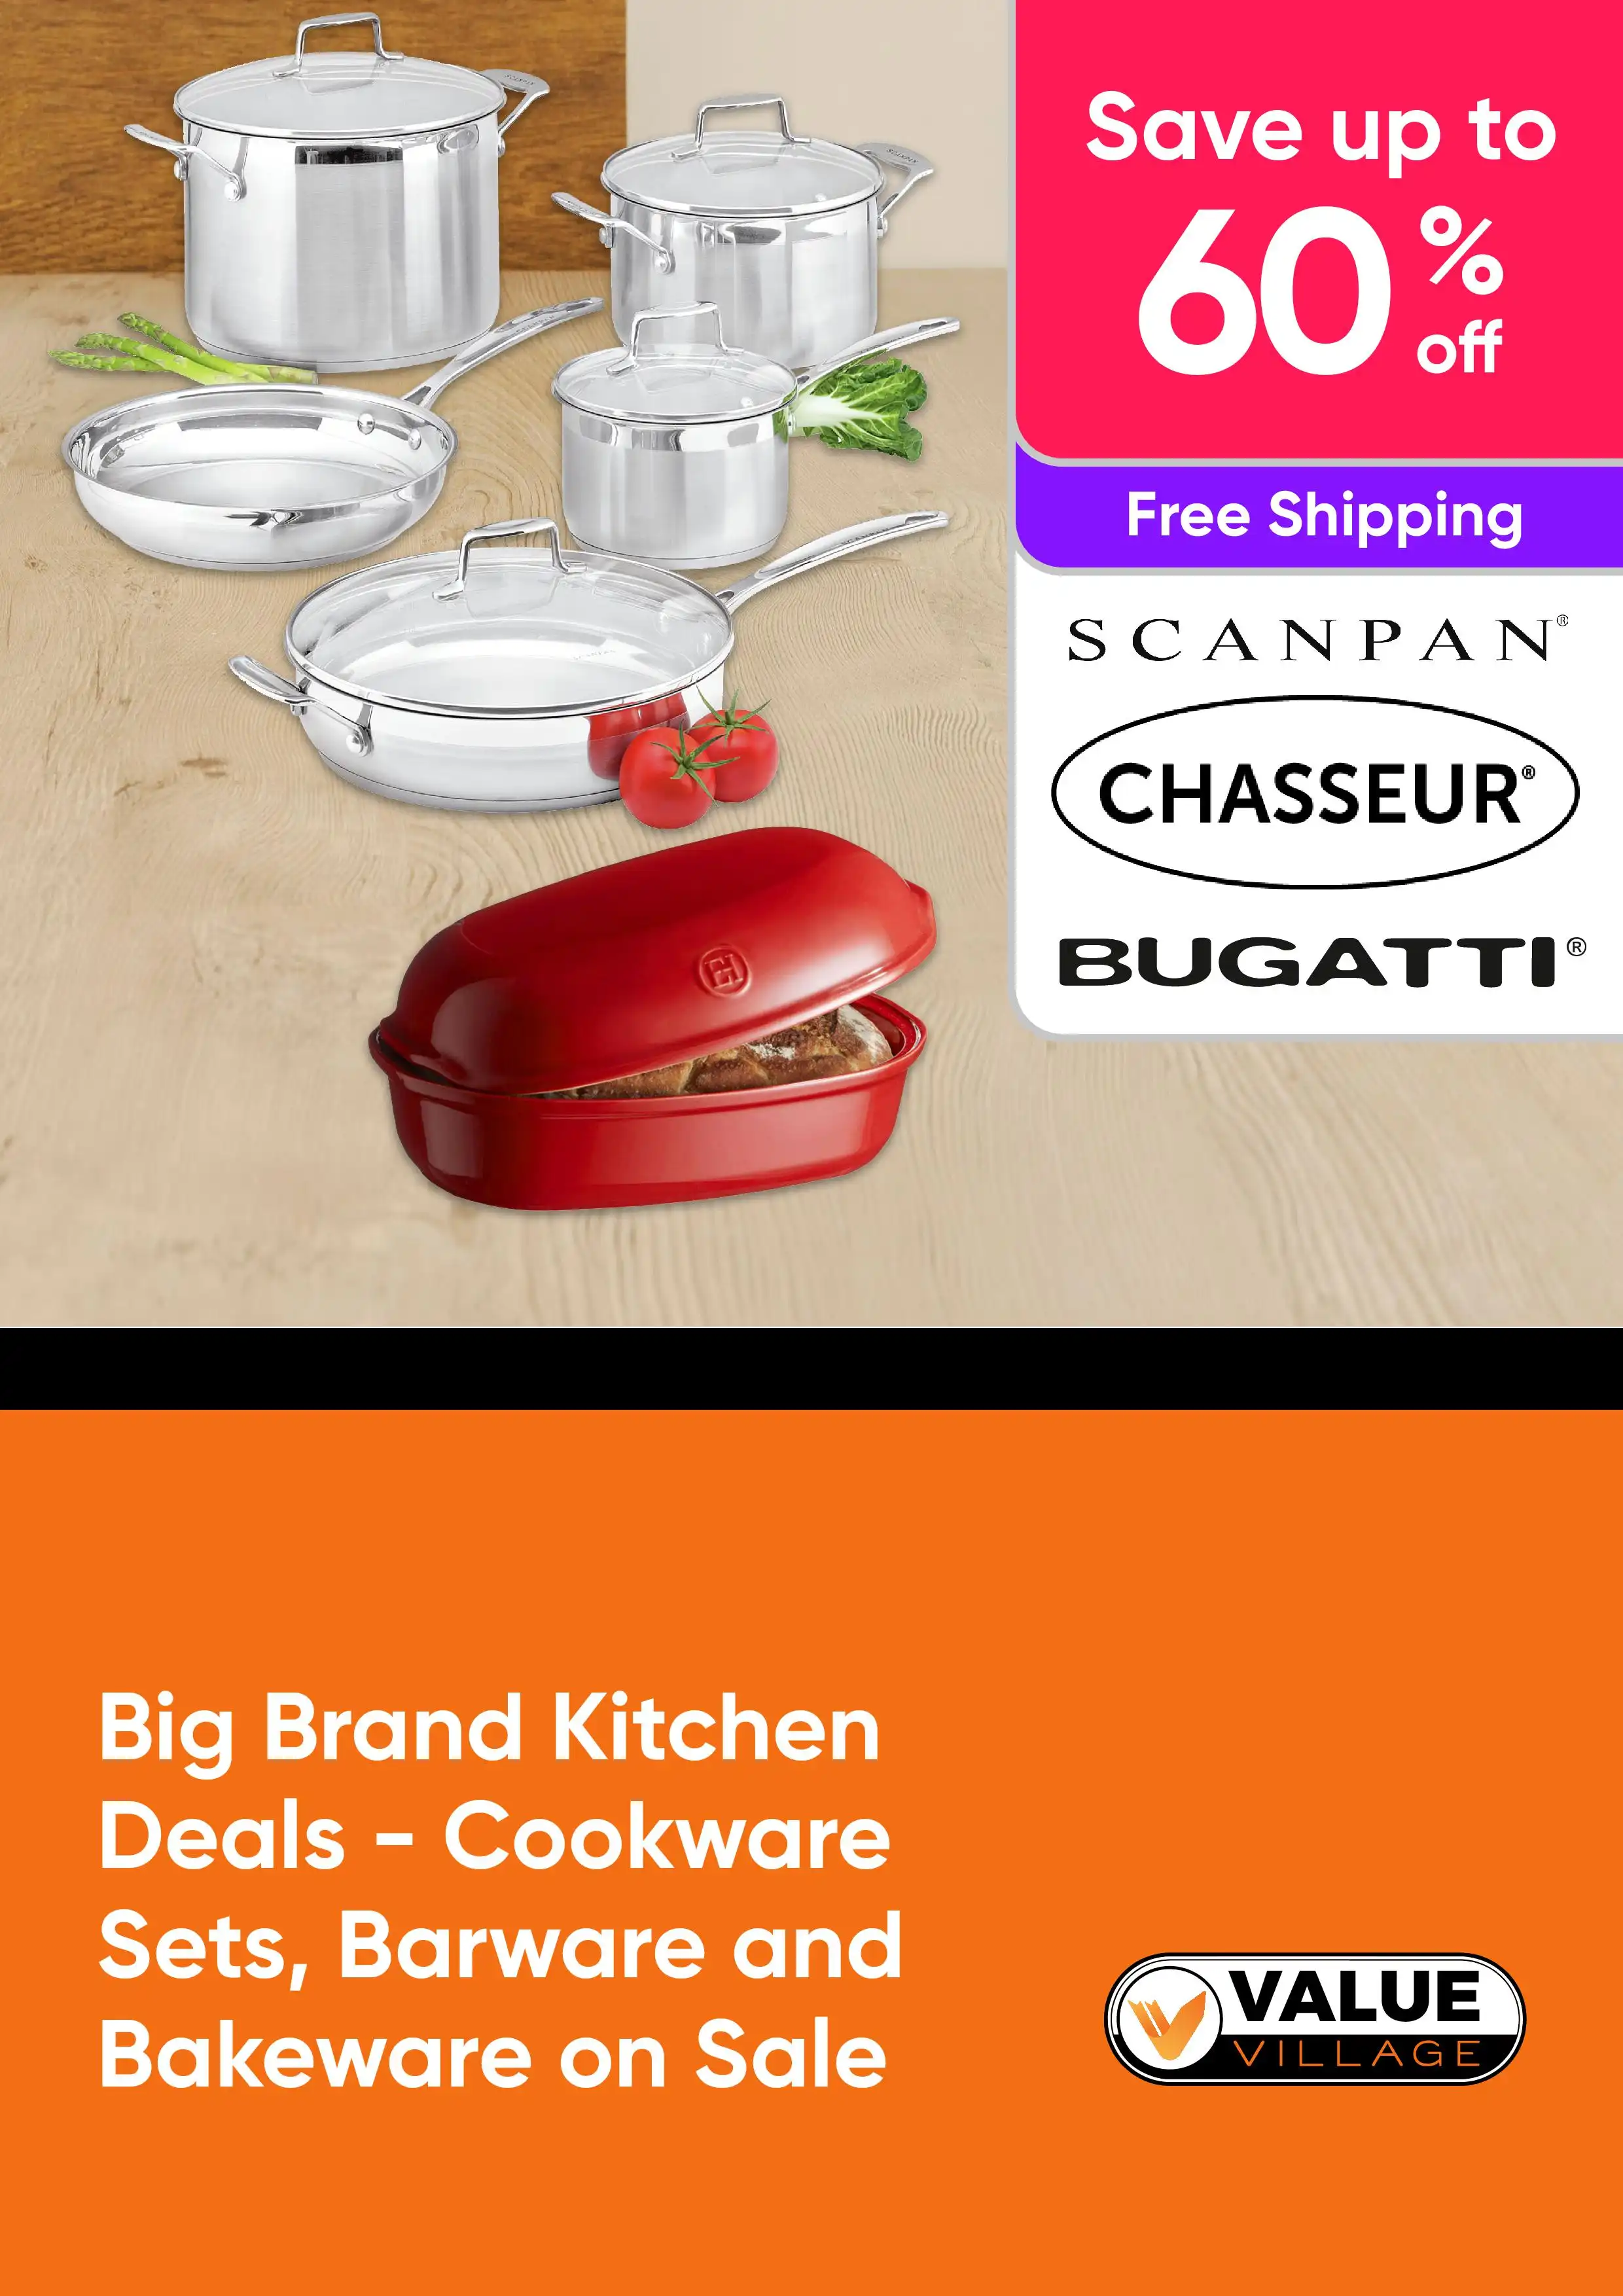 Big Brand Kitchen Deals - Cookware Sets, Barware and Bakeware on Sale - Scanpan, Chasseur, Bugatti - Up to 60% Off